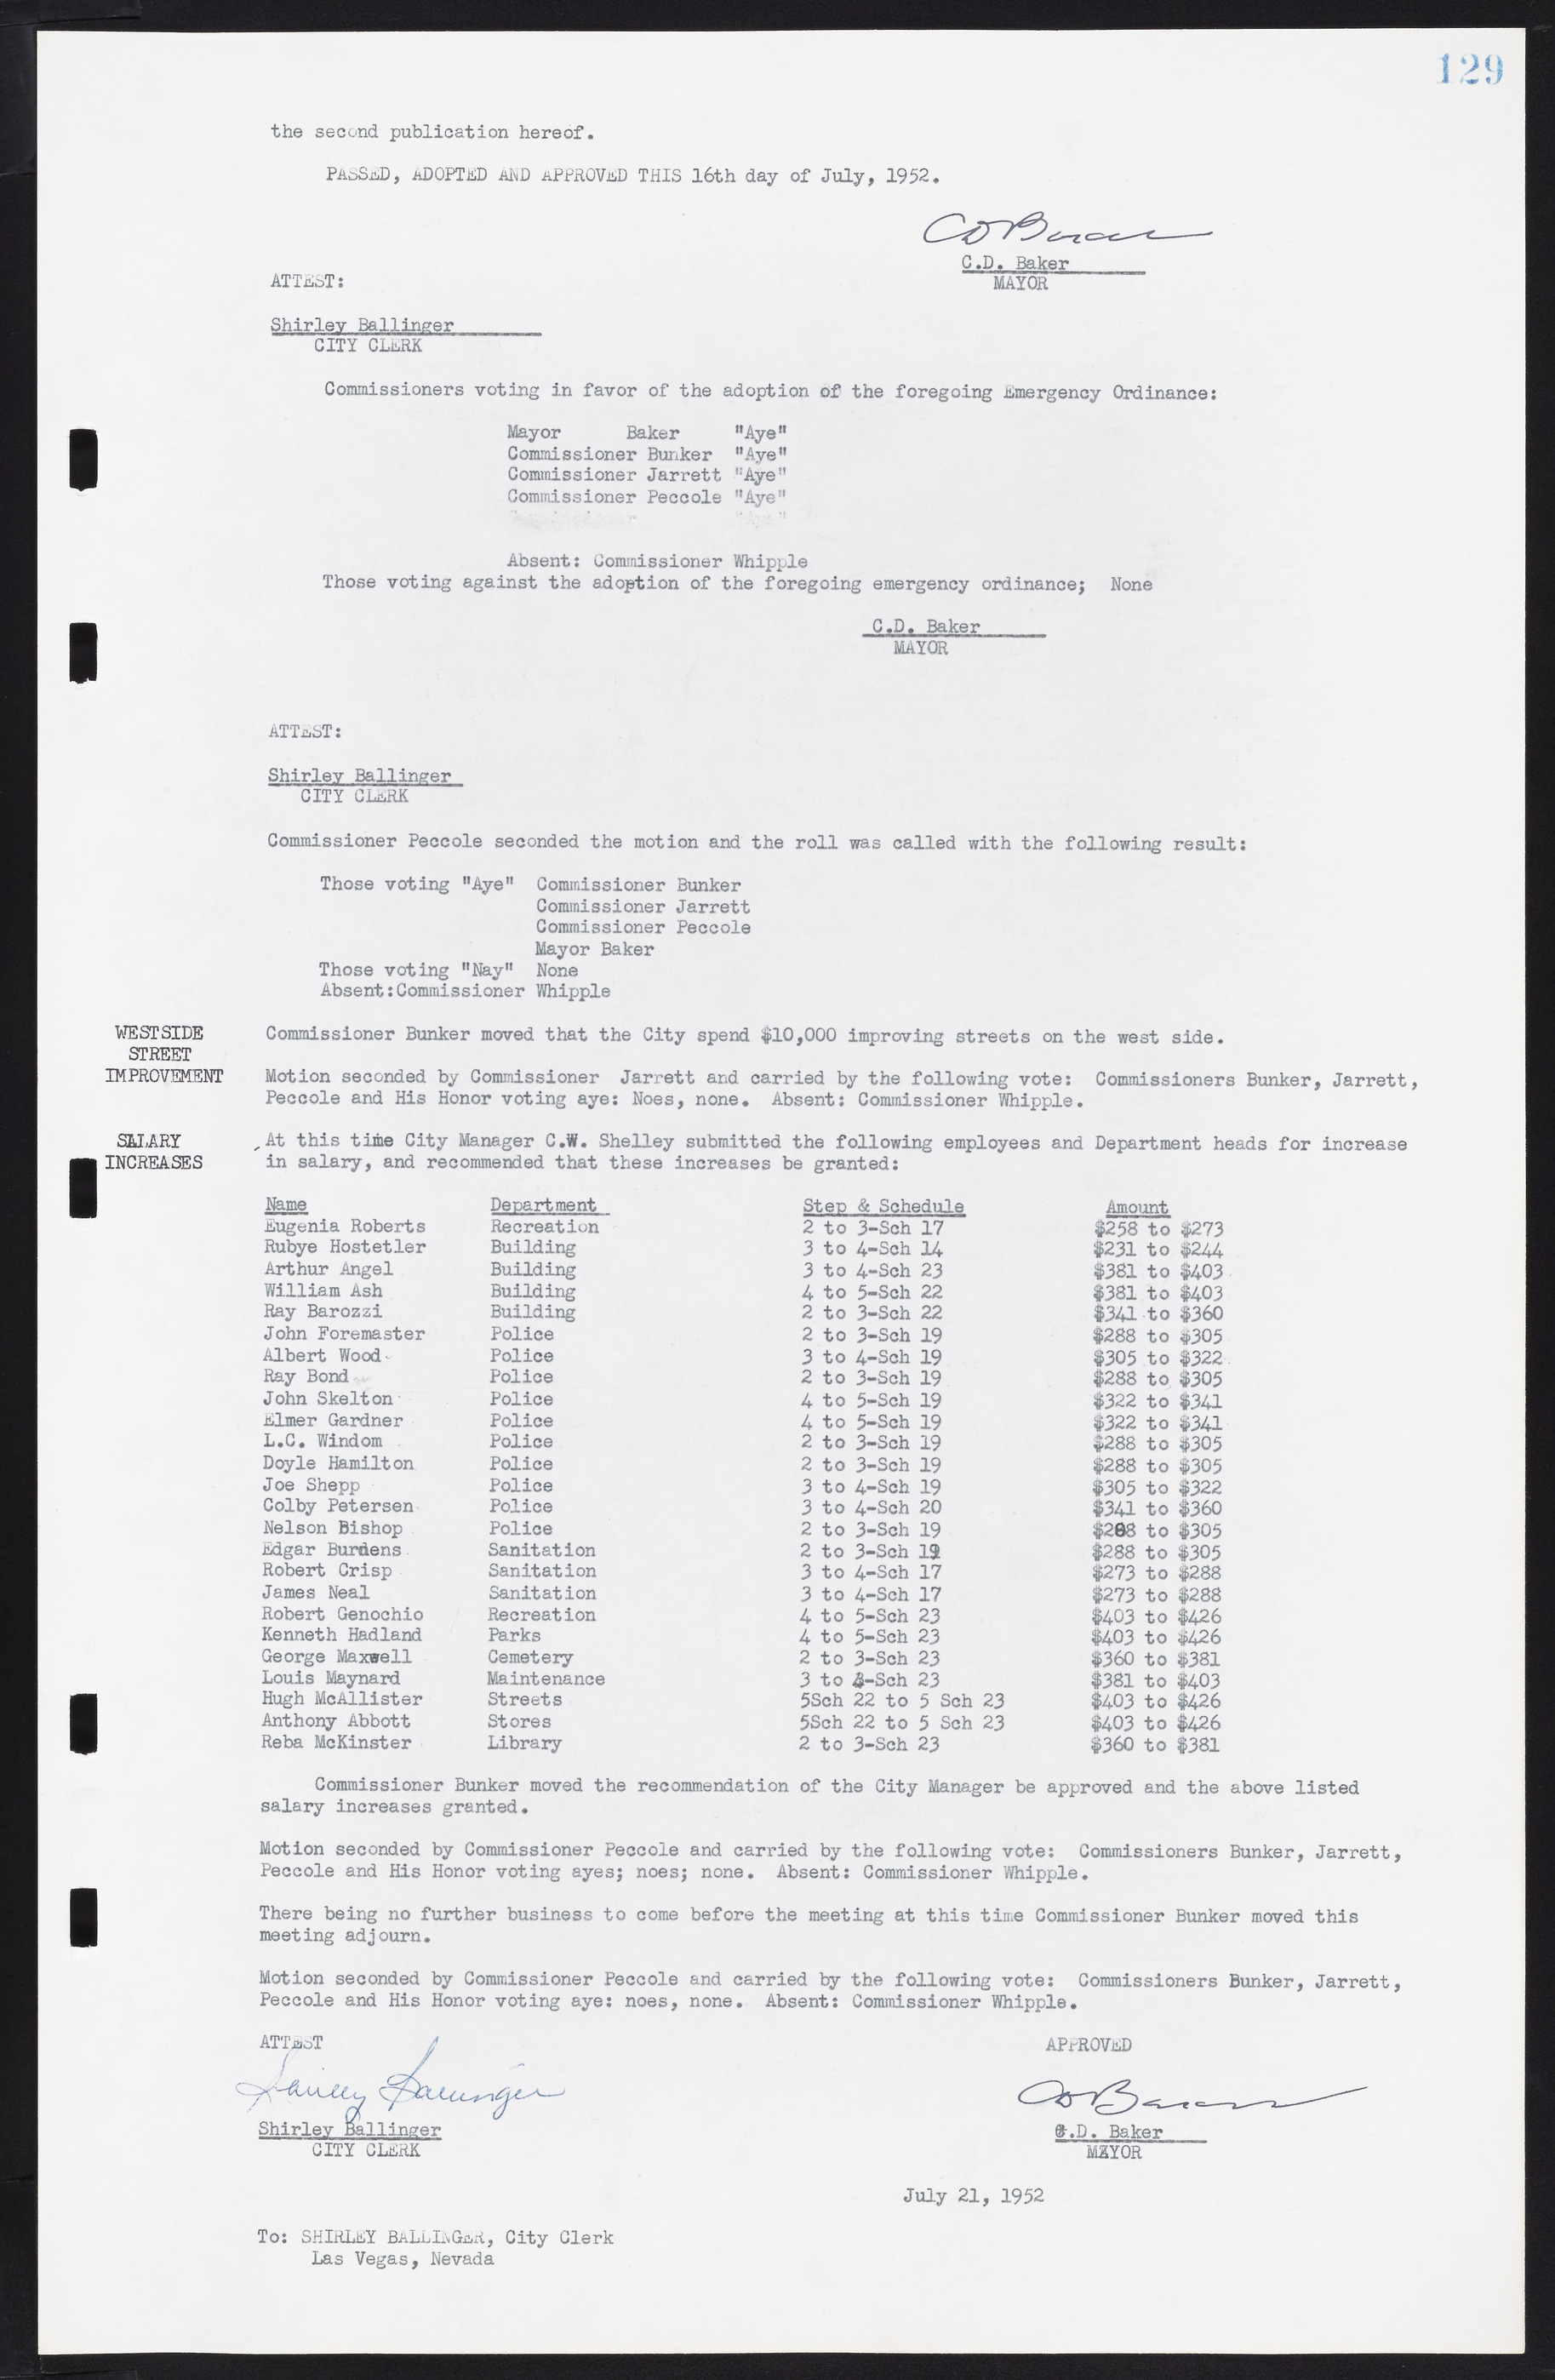 Las Vegas City Commission Minutes, May 26, 1952 to February 17, 1954, lvc000008-135